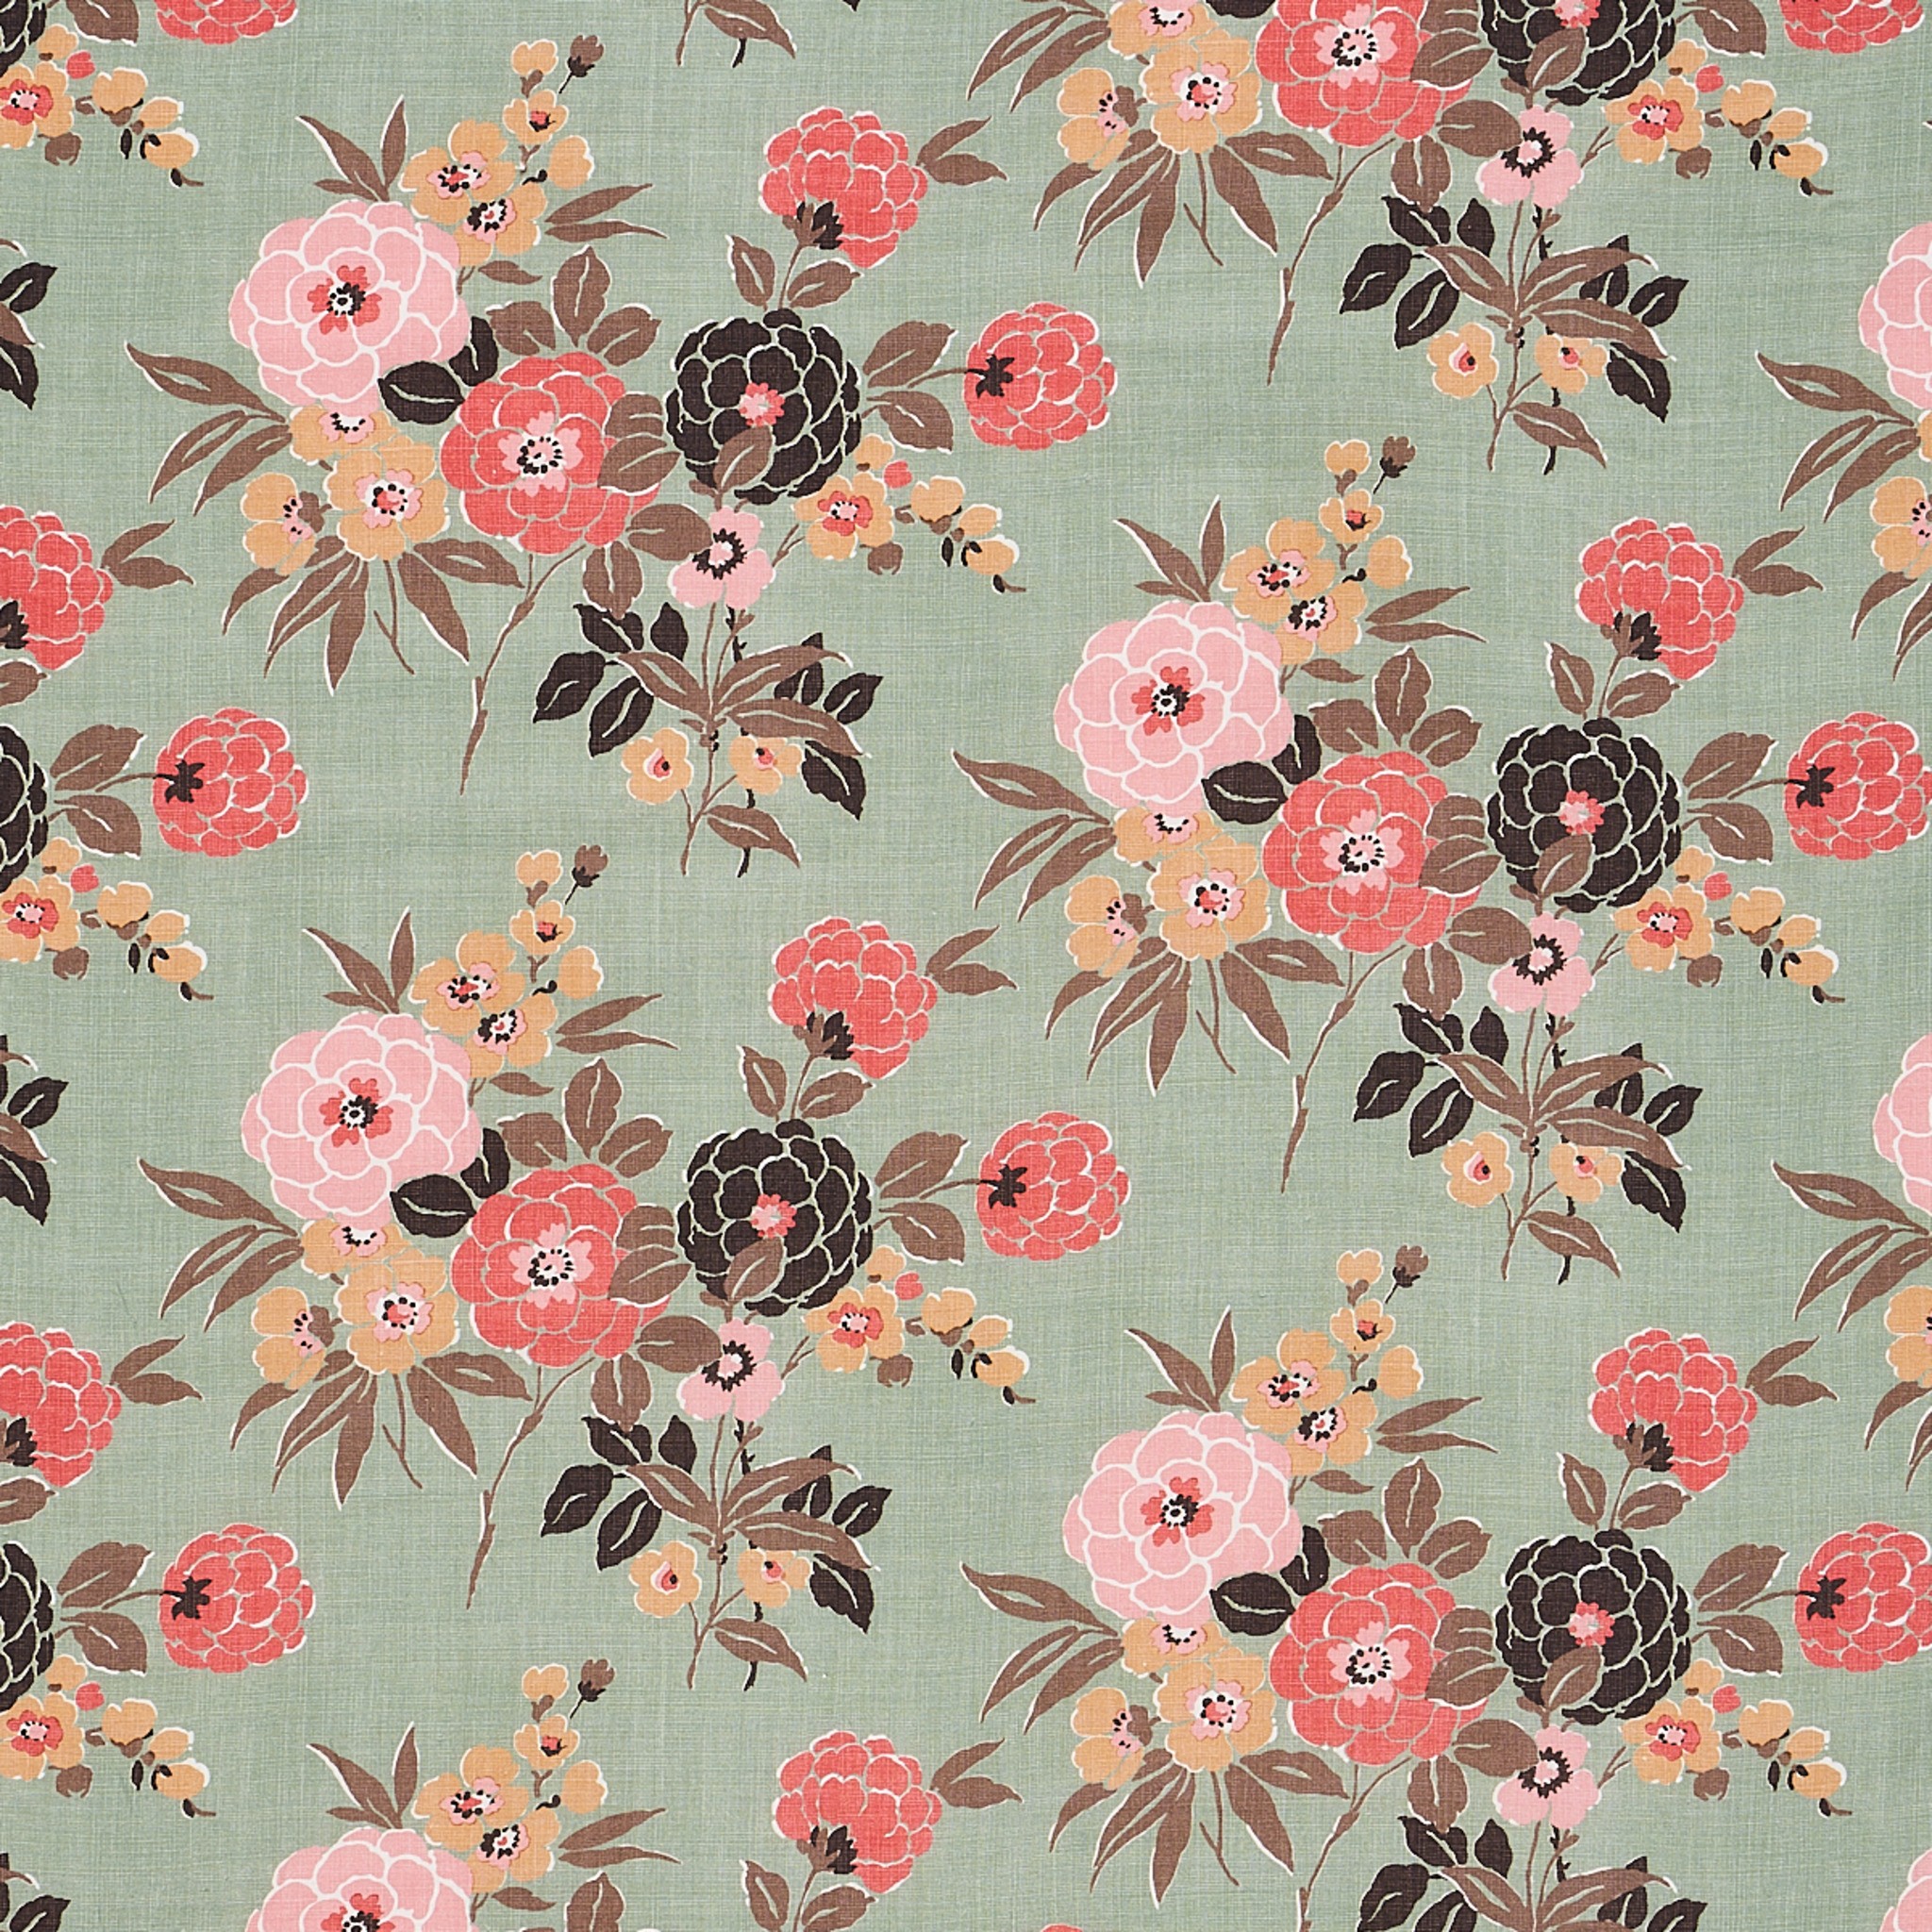 a floral pattern on a green background